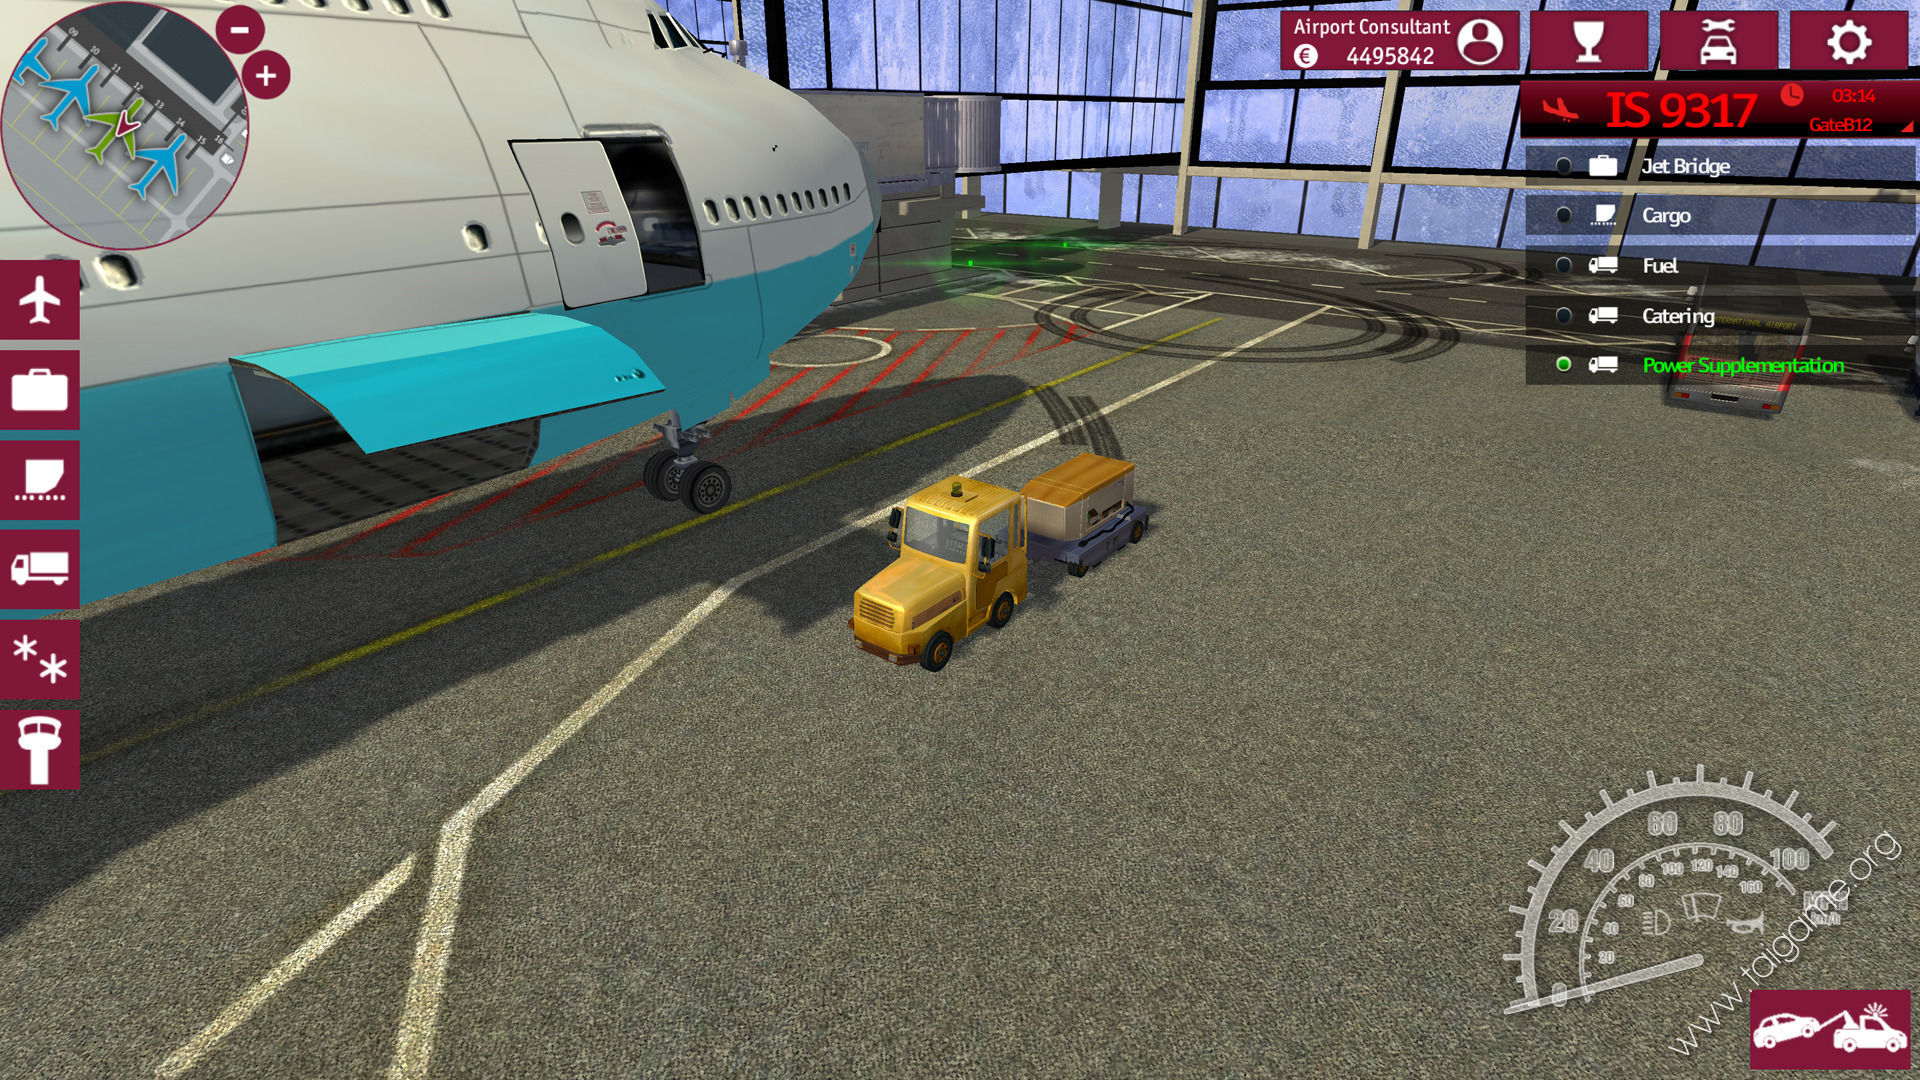 Airport fire simulator free download free